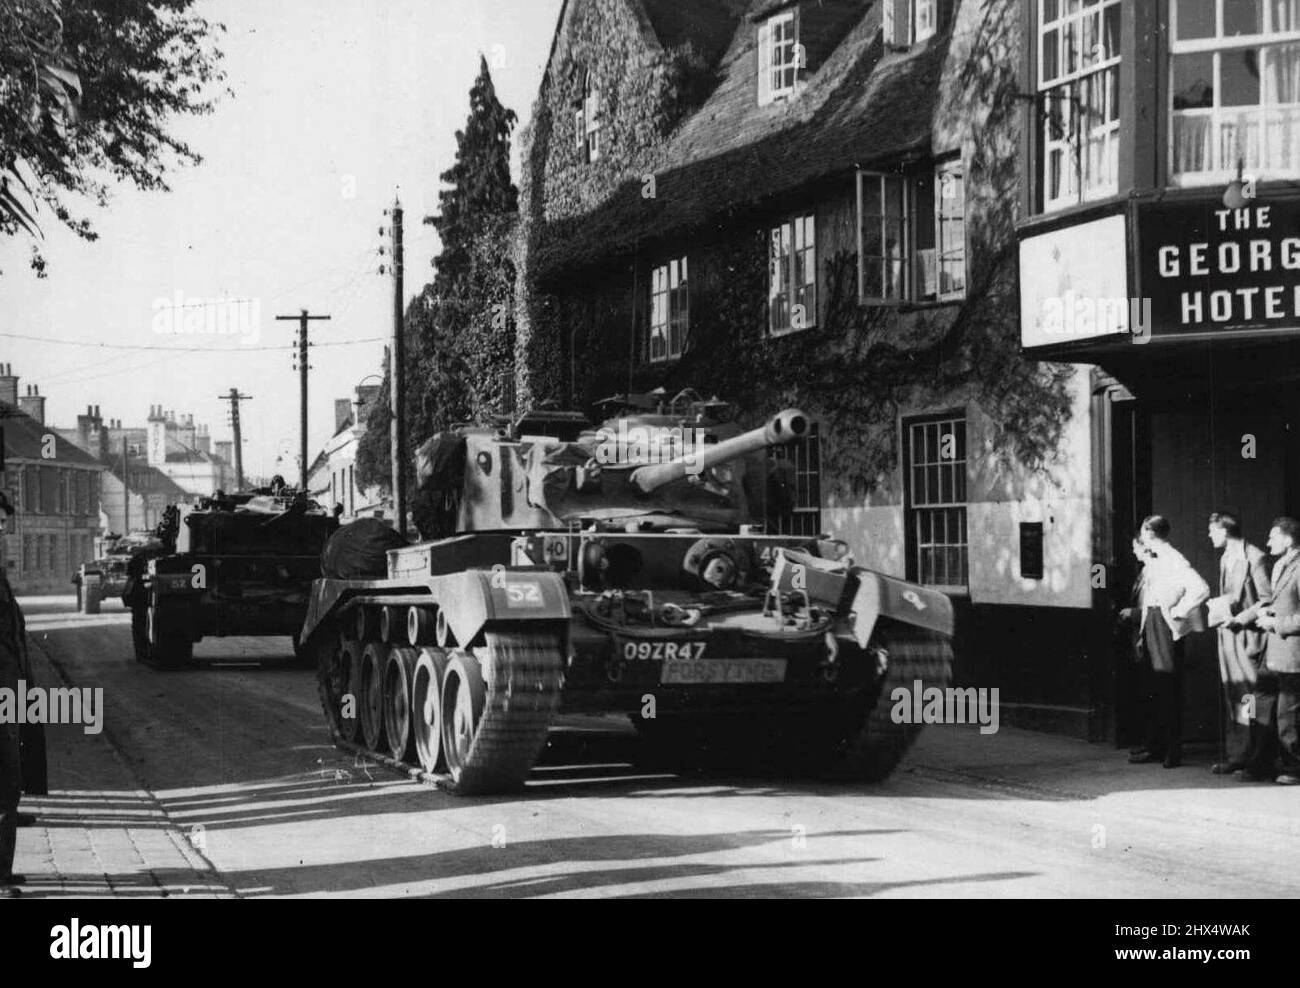 Britain's Biggest Army Maneuvers Start in Southern England -- Tanks of the 5th, Tank Regiment of the 6th. Armored Division, passing through a typical English village of Amesbury, to take up positions in the northern part of the area. Exercise 'surprise Packet' - the biggest Army maneuvers to be held in Britain is taking place over eight counties of Southern England involving some 50, 000 troops. The exercise will last for four days. October 13, 1951. (Photo by Sport & General Press Agency, Limited). Stock Photo